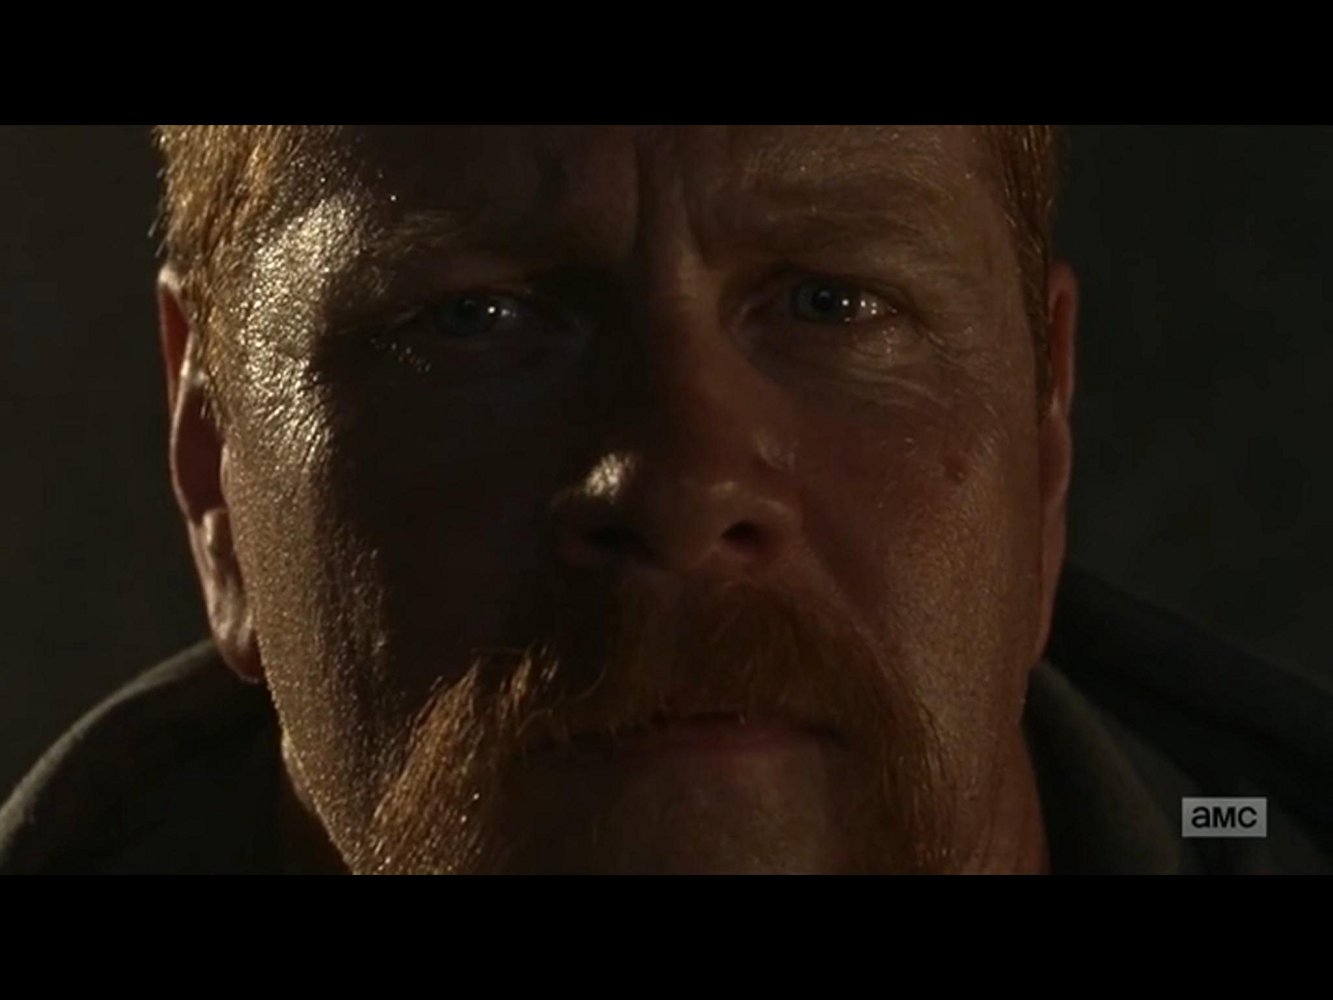 Sgt. Abraham Ford